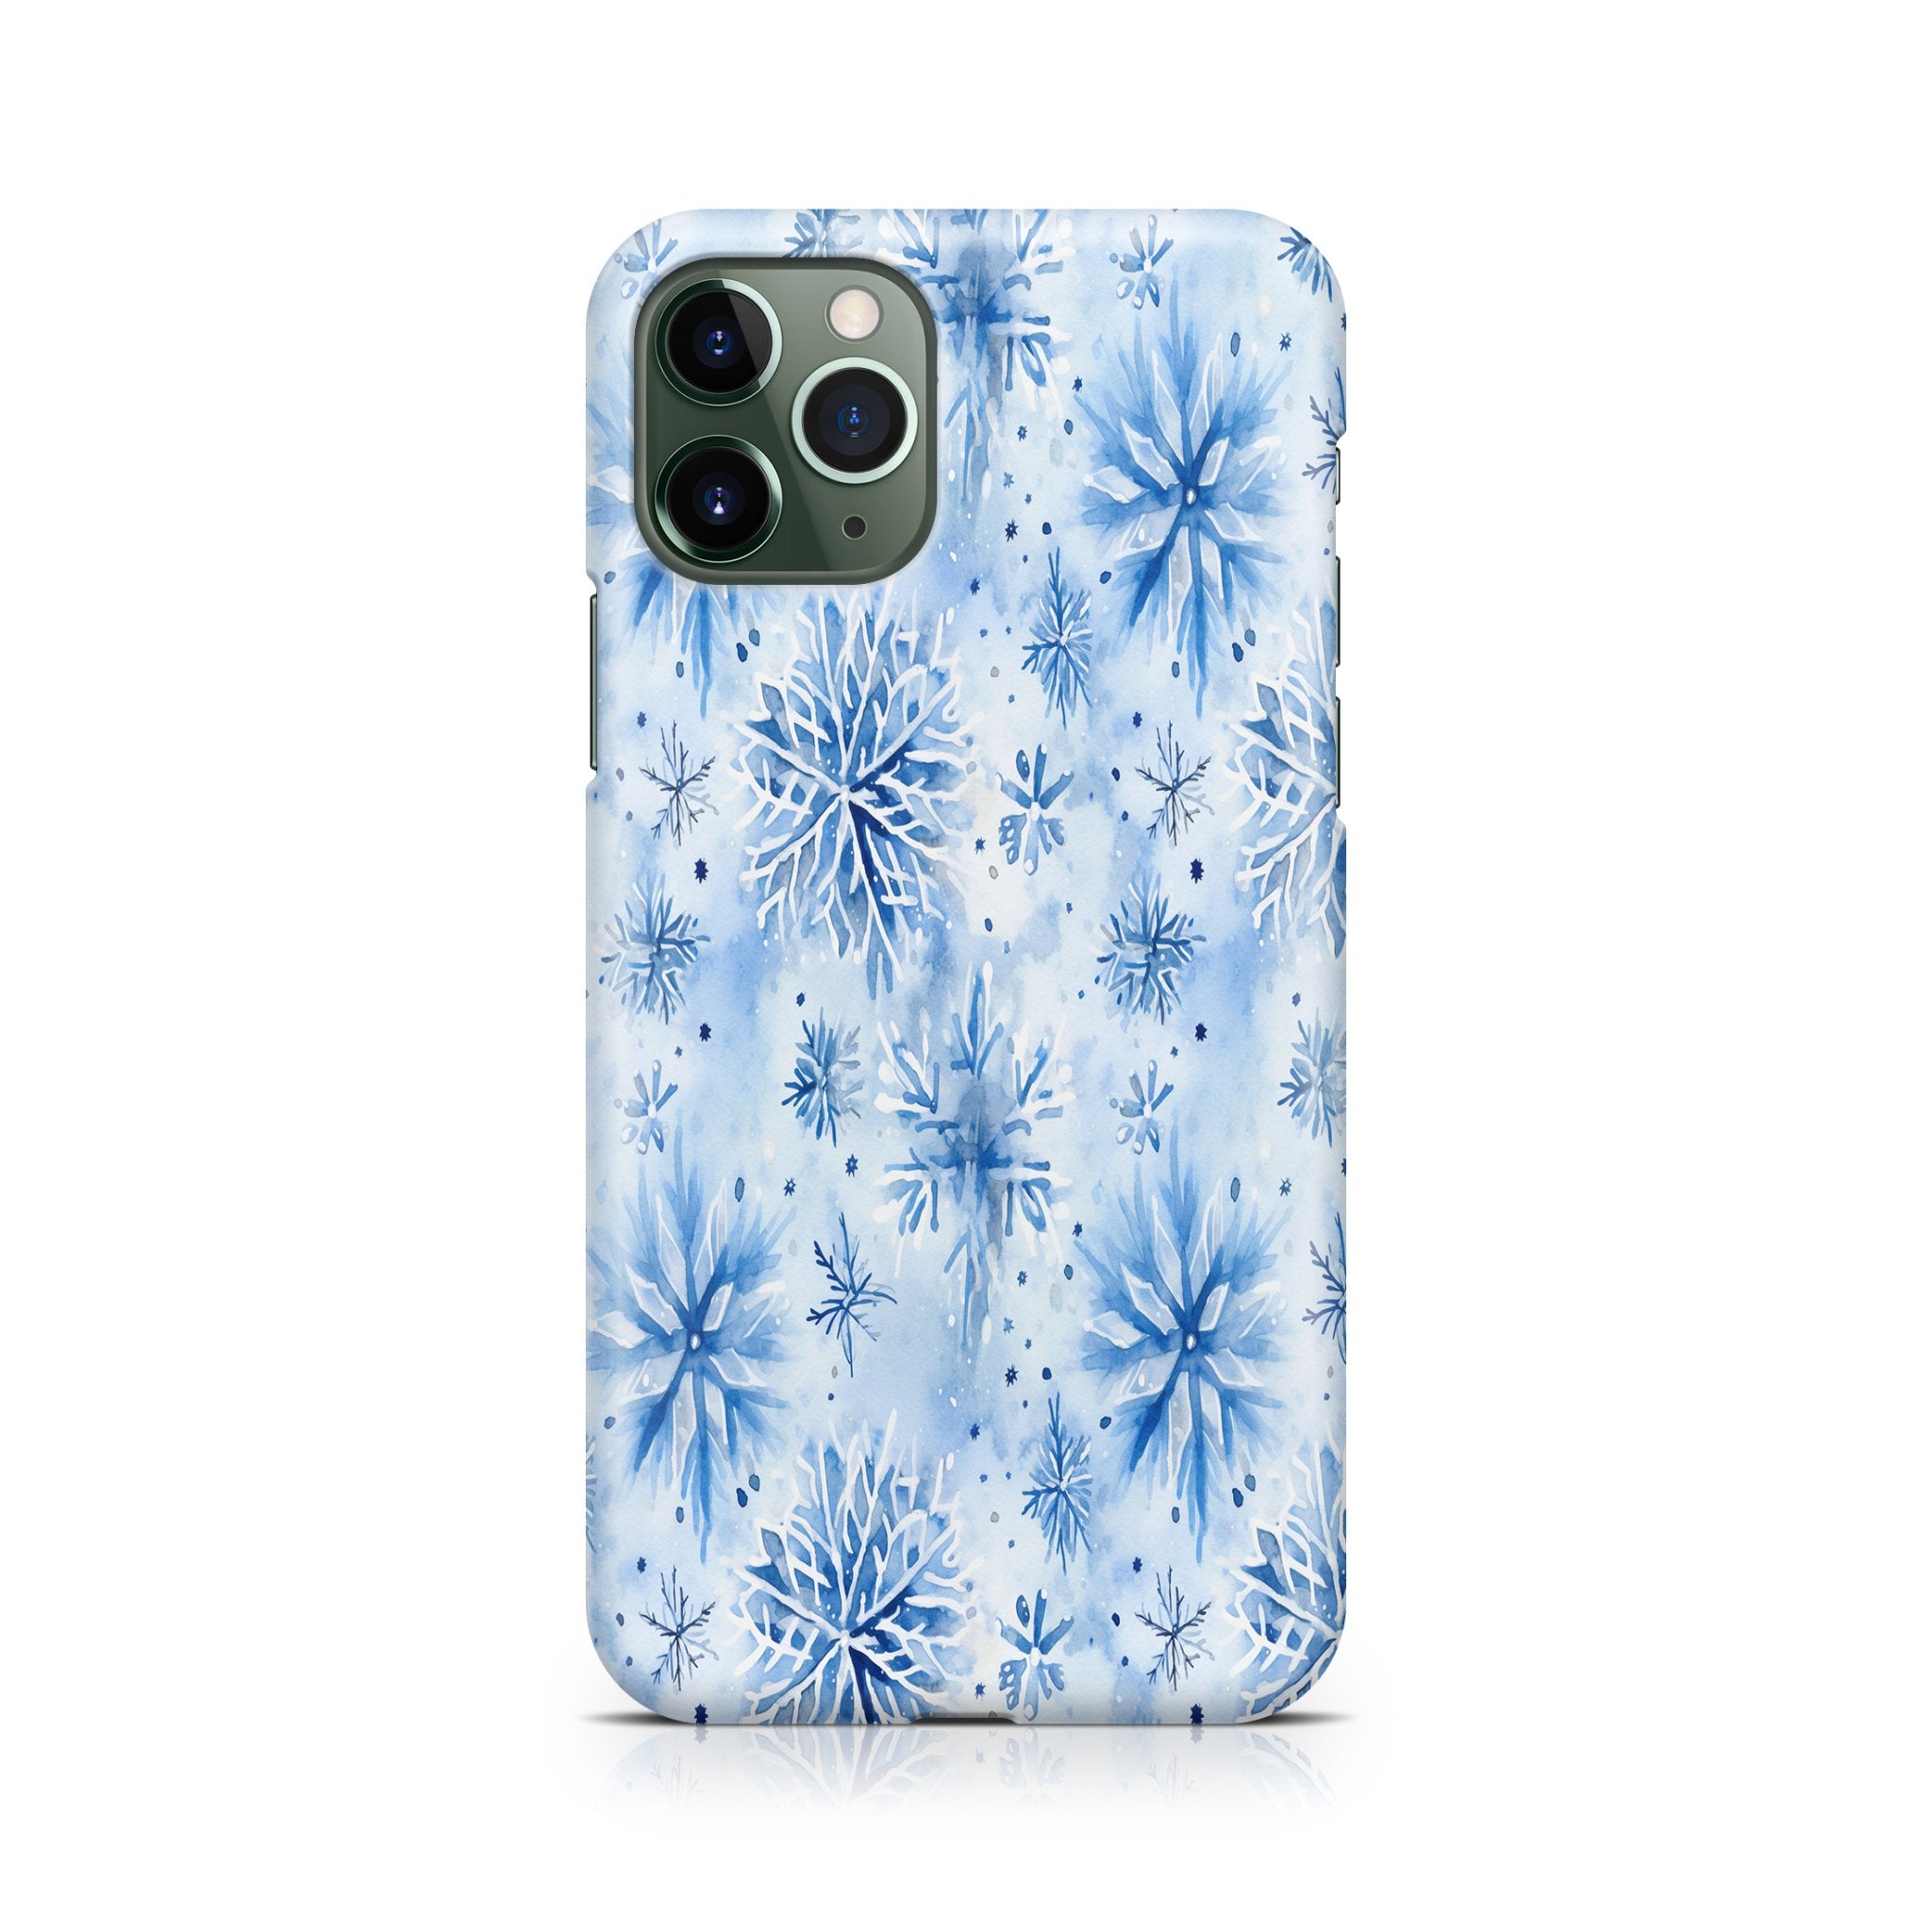 Serenity Snowflake - iPhone phone case designs by CaseSwagger